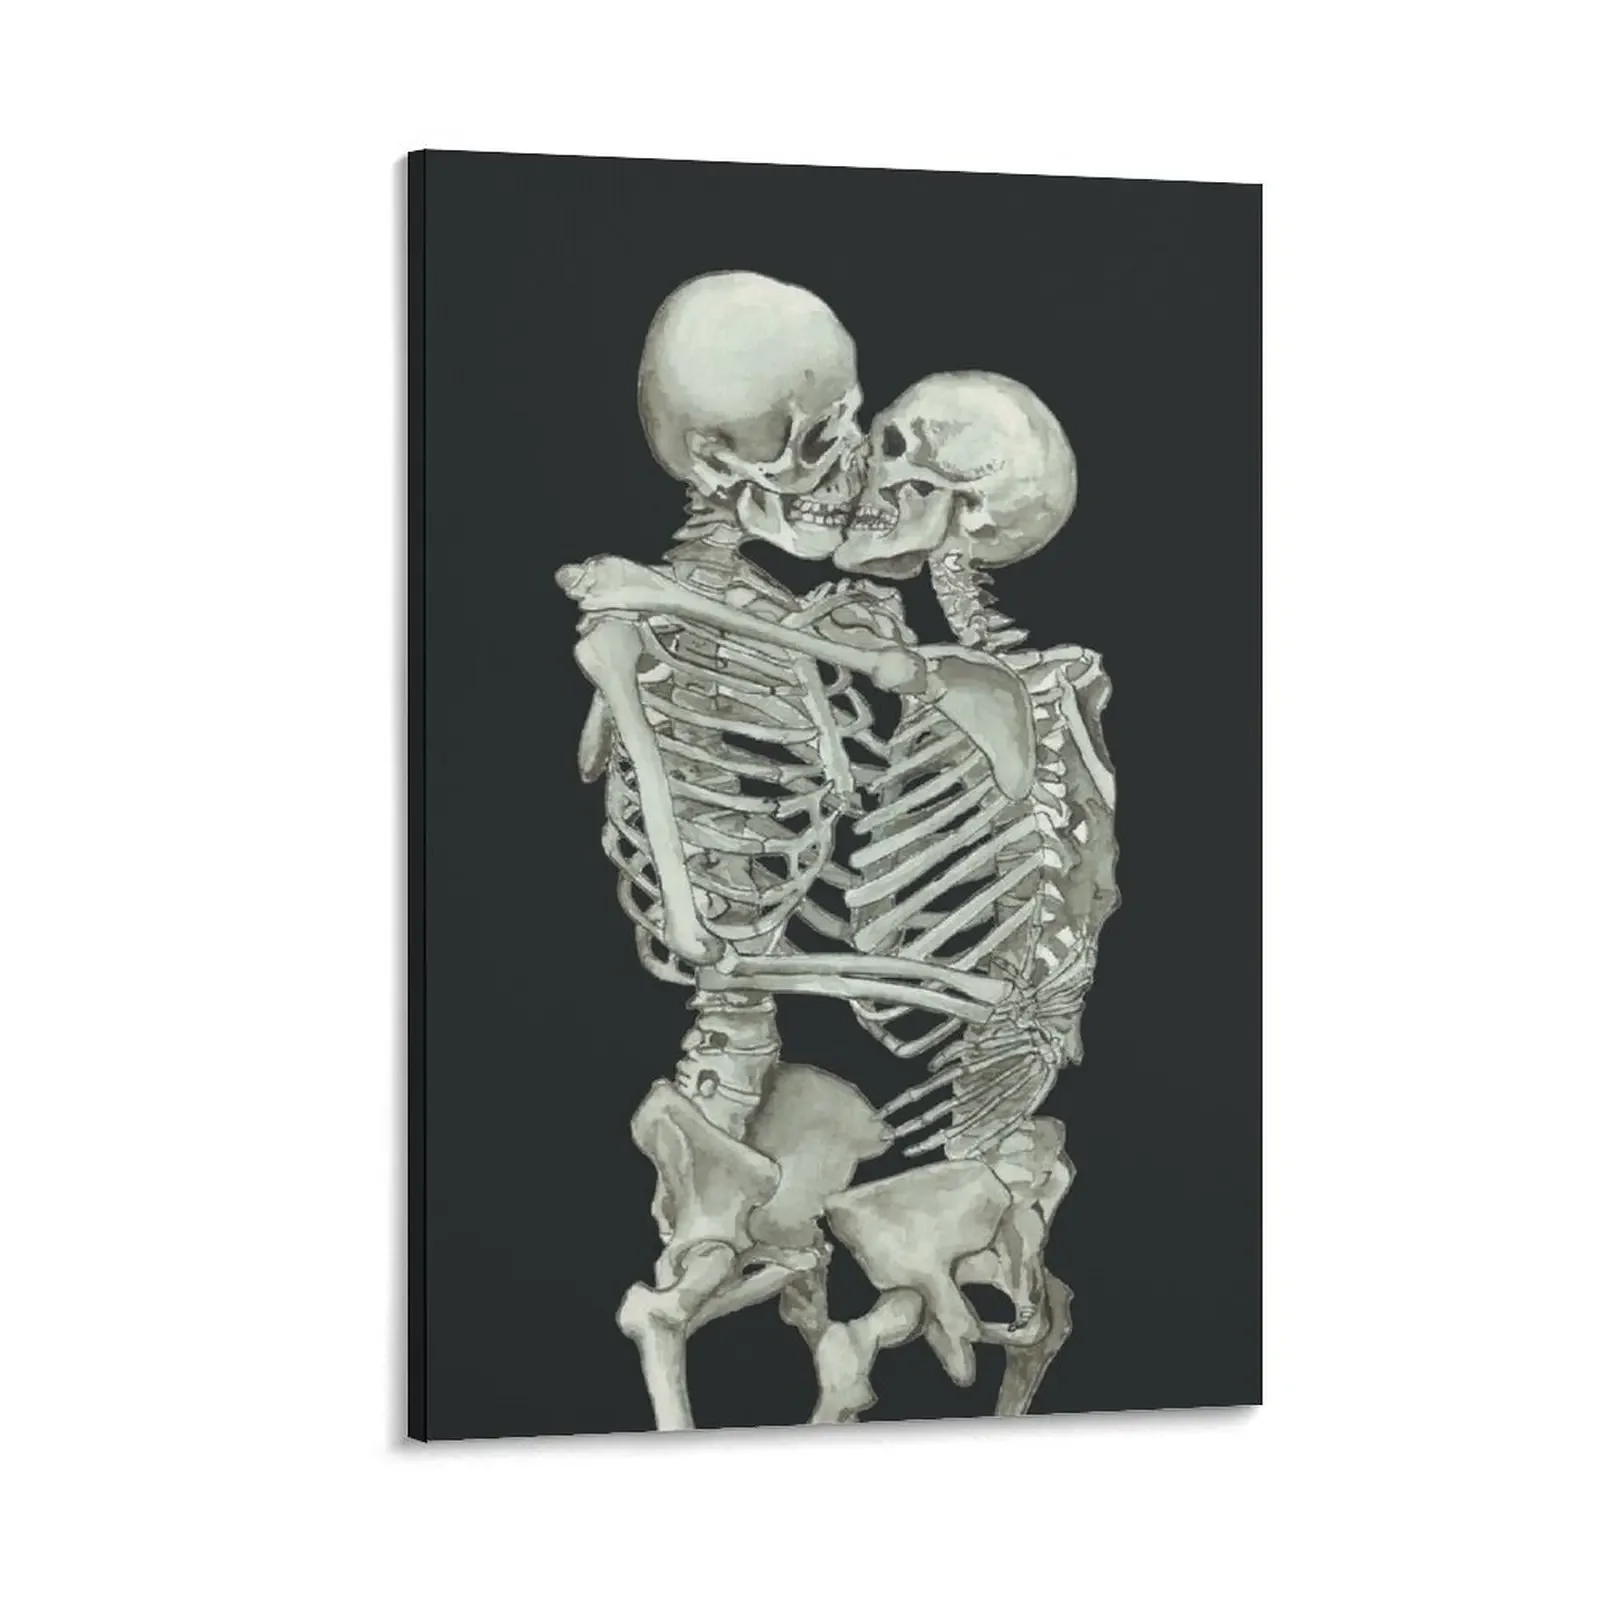 

Skeleton Kiss: Immortal Lovers, Anatomy Love Valentines Gift Canvas Painting Home decoration wall decor